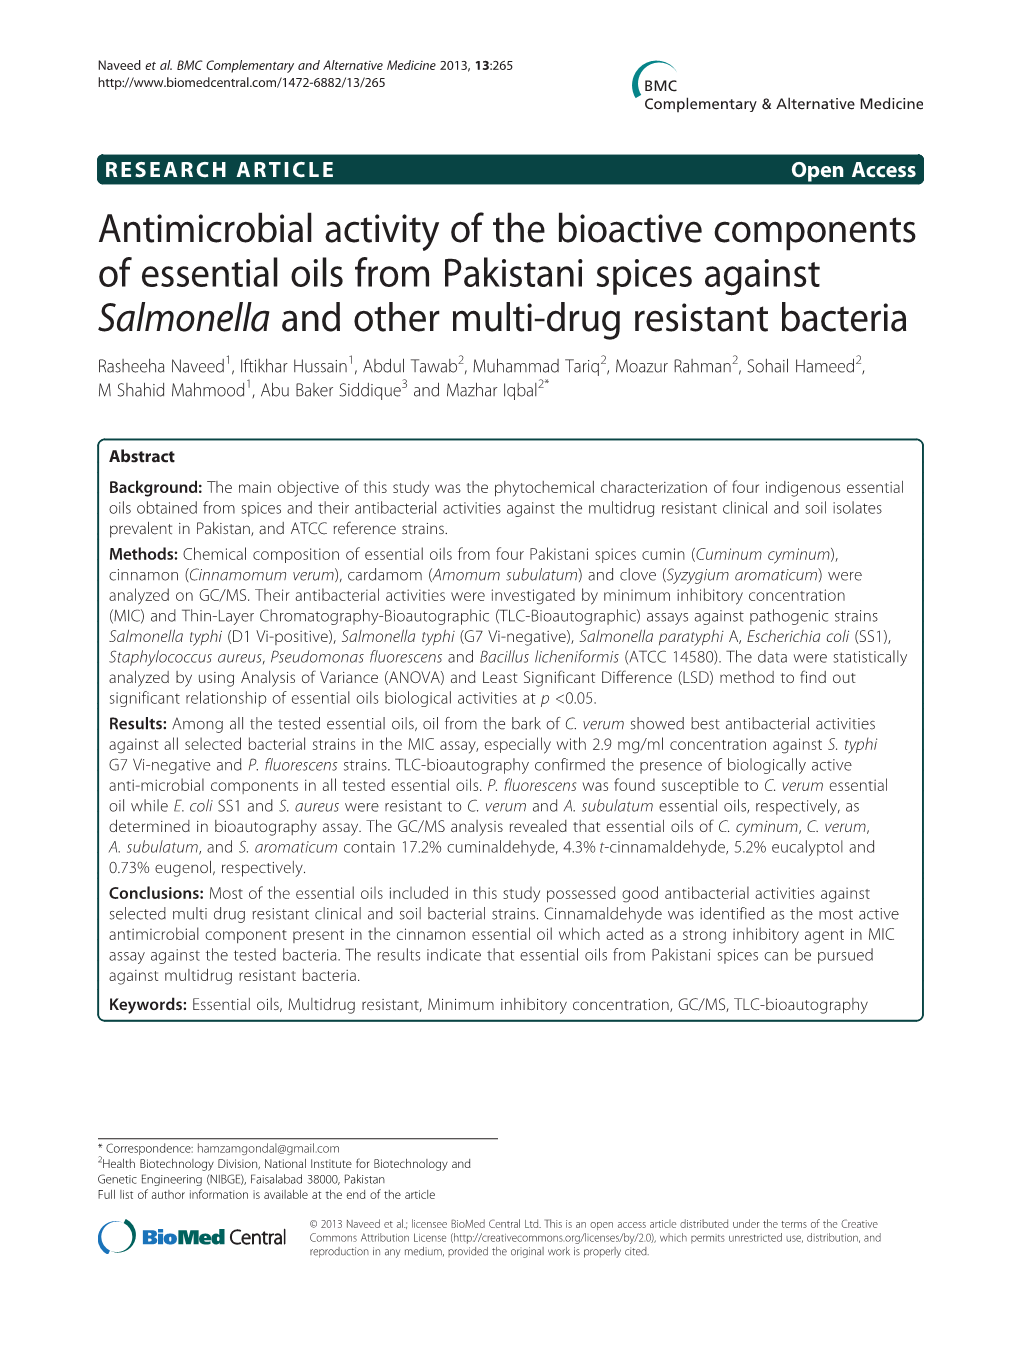 Antimicrobial Activity of the Bioactive Components of Essential Oils From